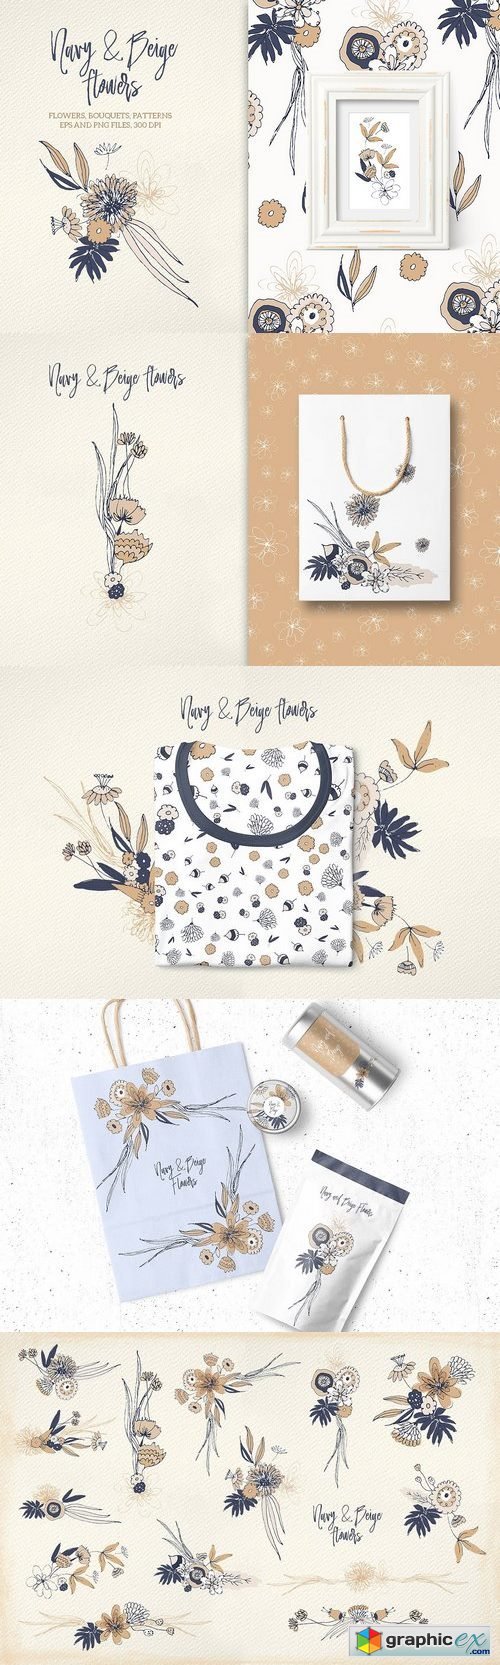 Navy and Beige Flowers